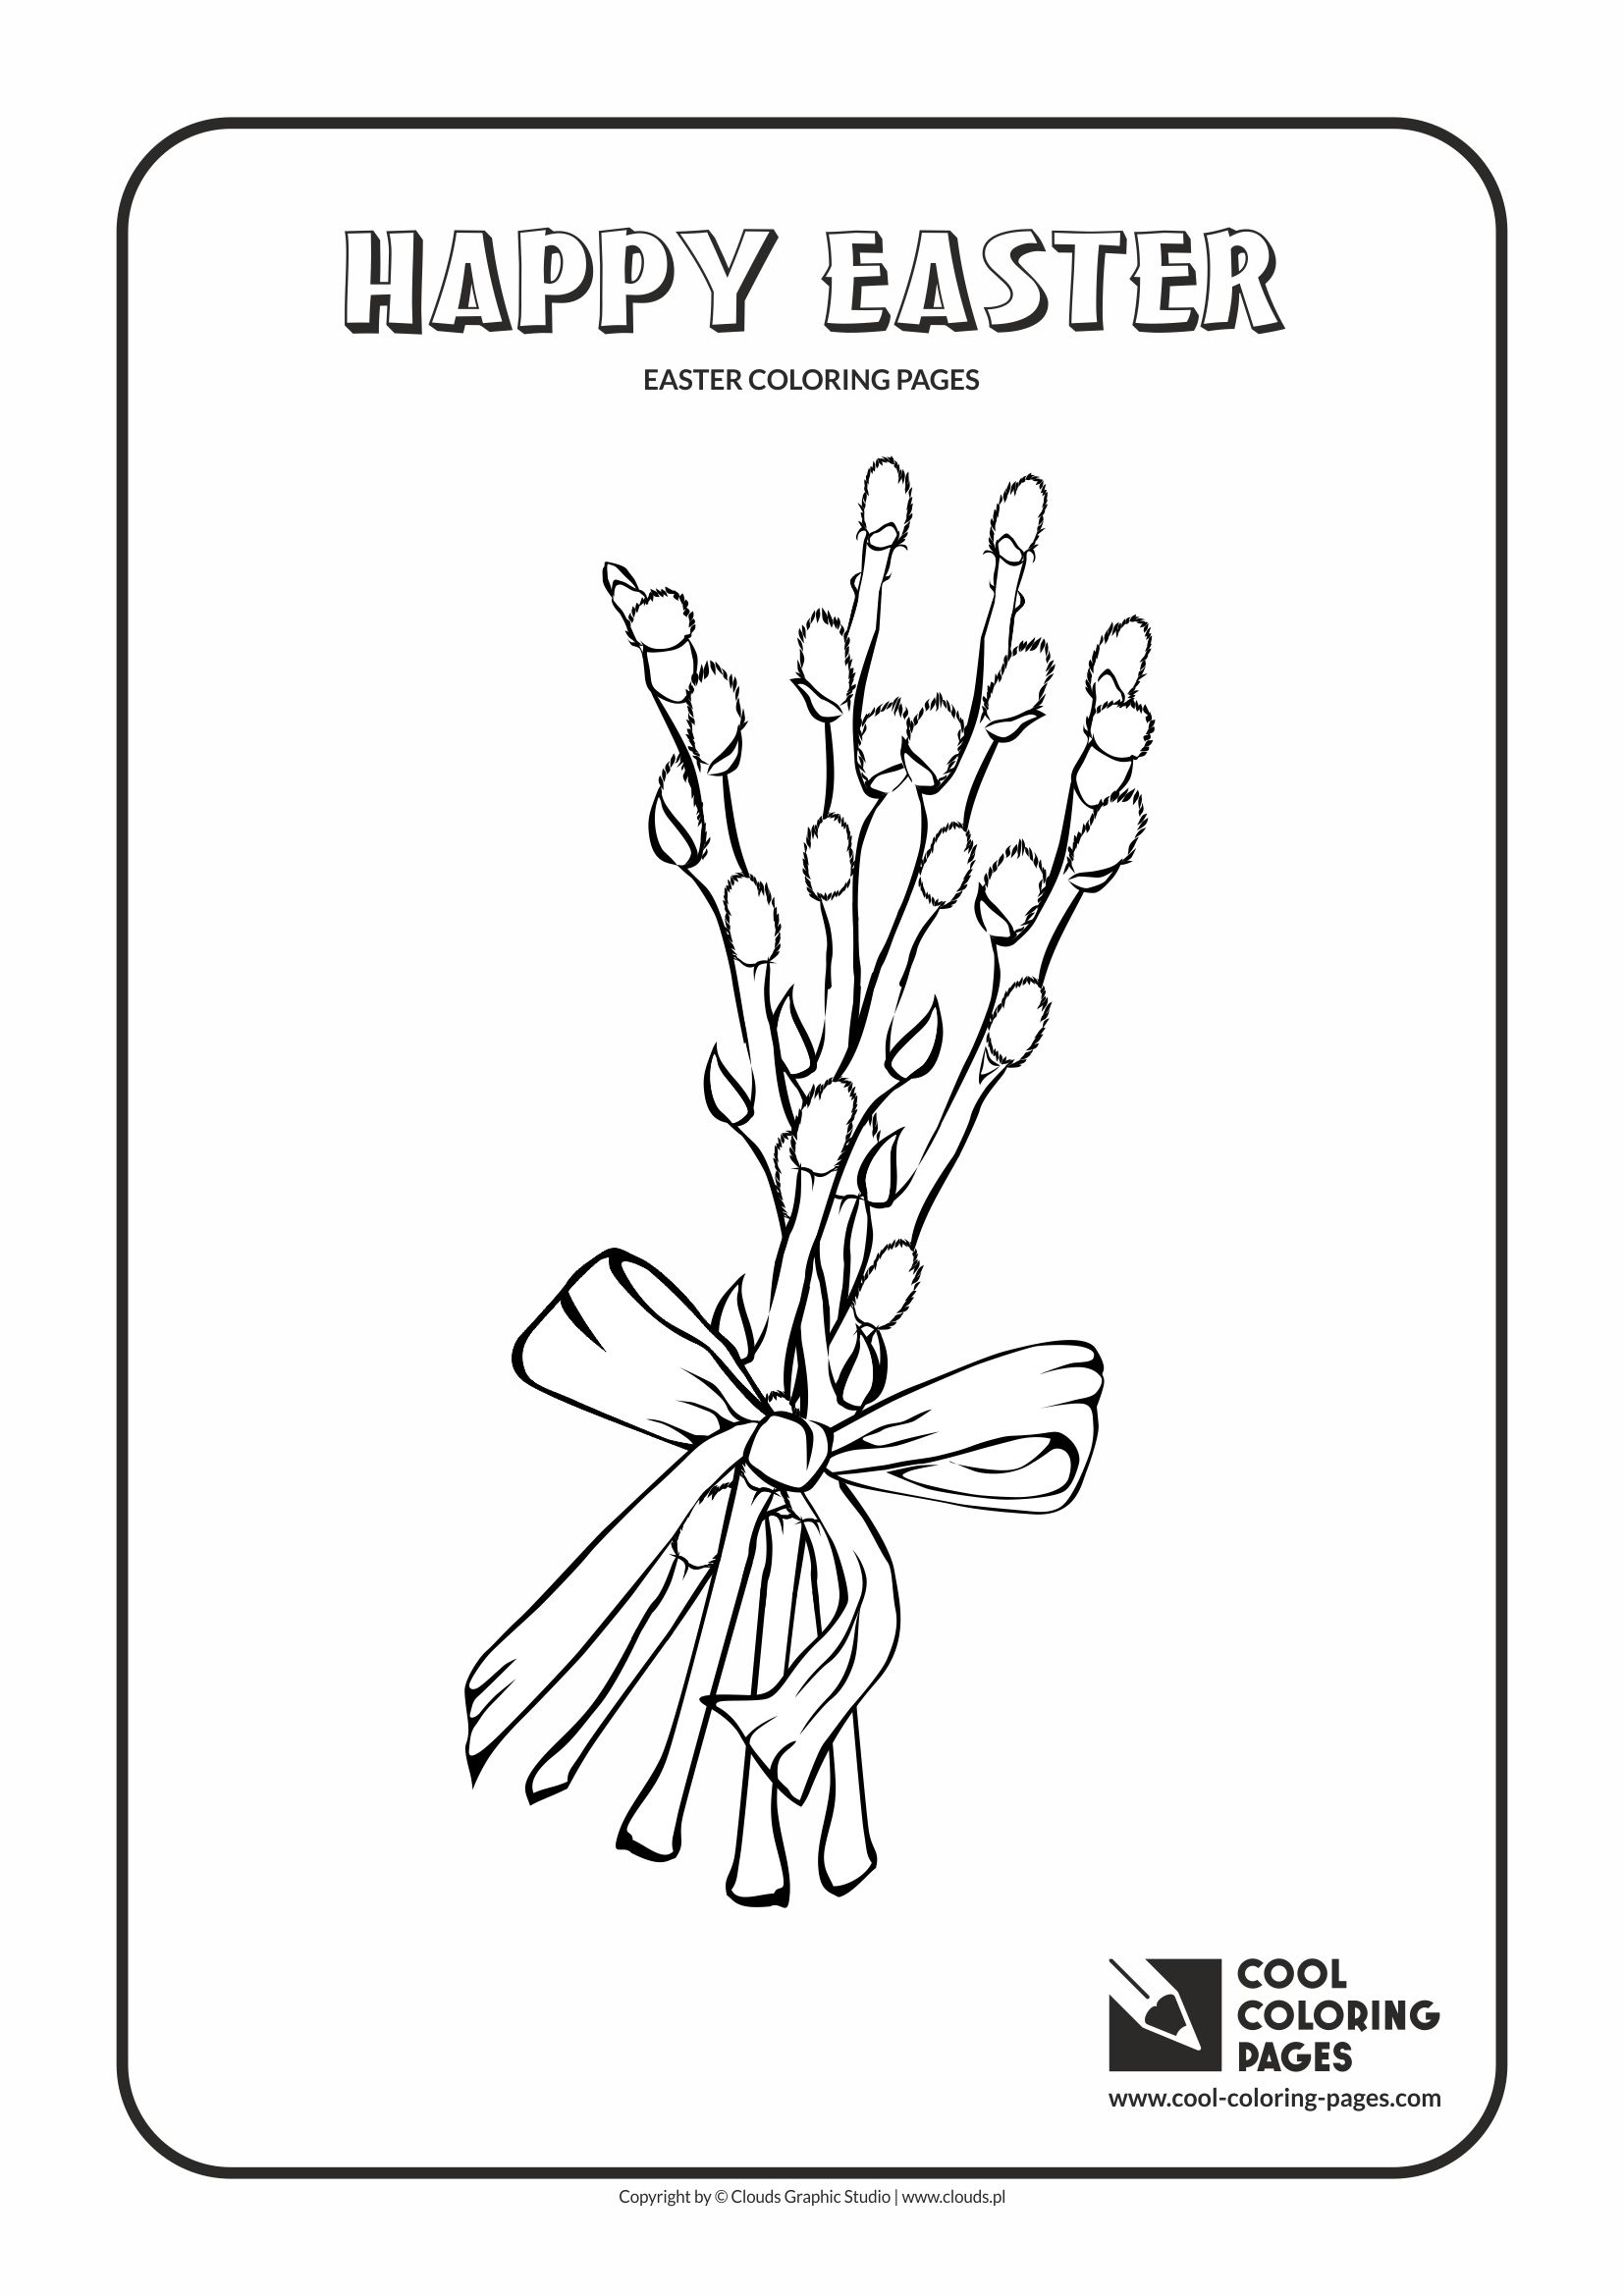 Cool Coloring Pages - Holidays / Easter palm / Coloring page with Easter palm